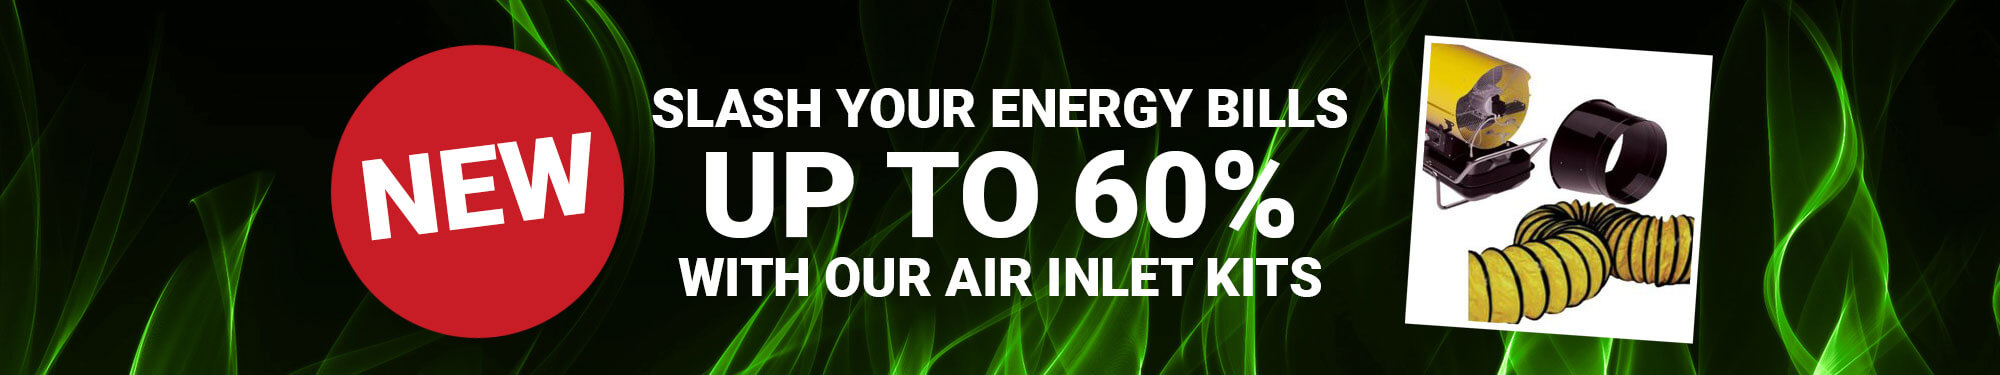 Slash your energy bills up to 60% with our air inlet kits